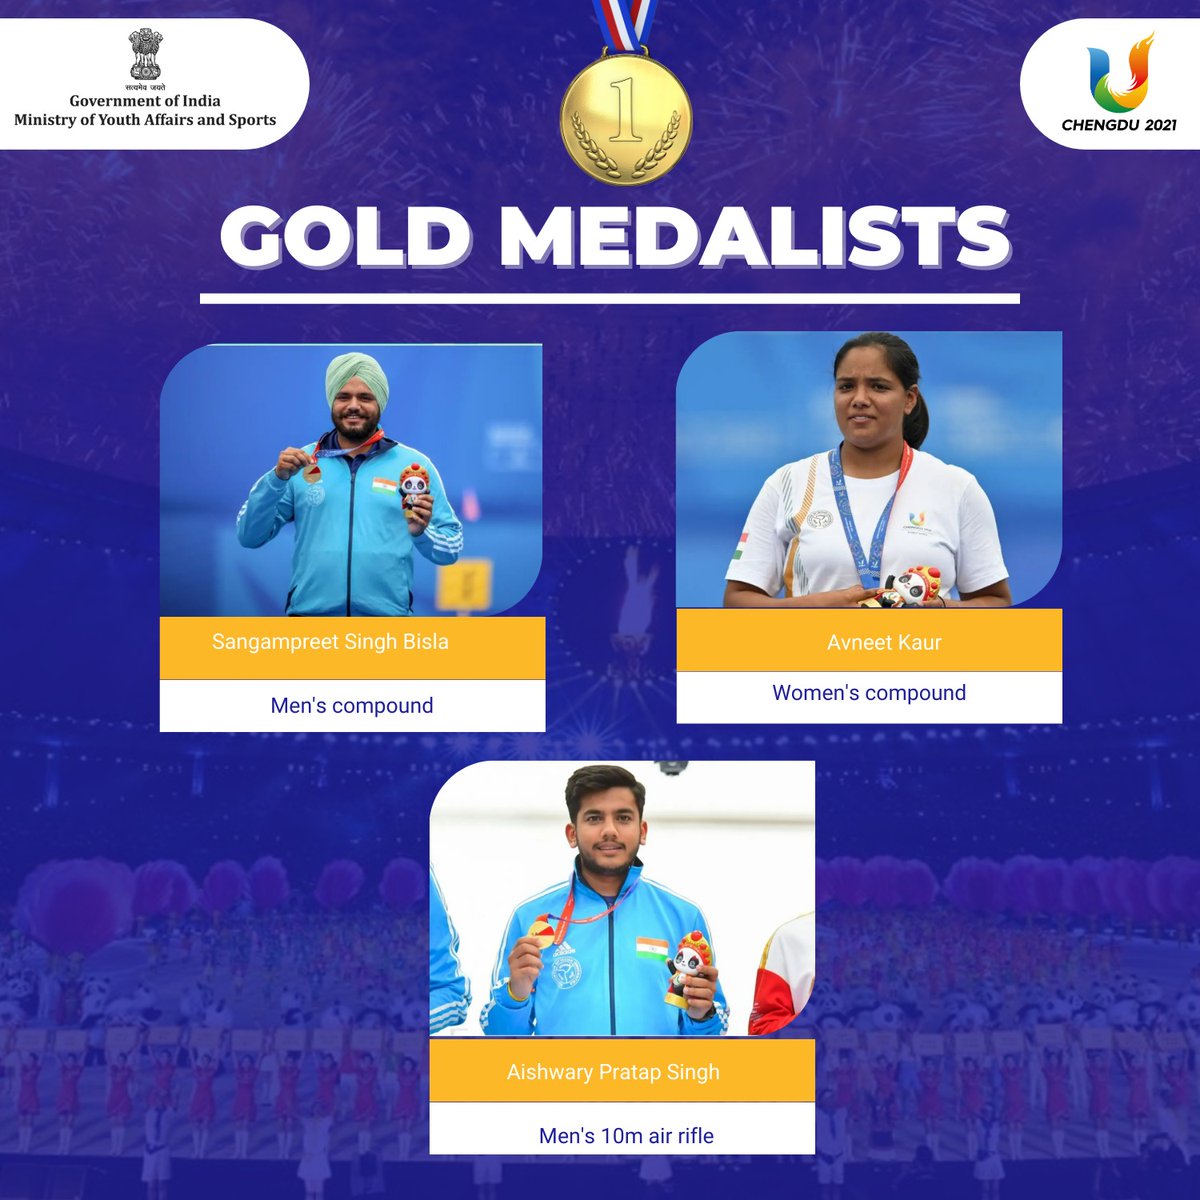 A sporting performance that will make every Indian proud! At the 31st World University Games, Indian athletes return with a record-breaking haul of 26 medals! Our best performance ever, it includes 11 Golds, 5 Silvers, and 10 Bronzes. A salute to our incredible athletes who